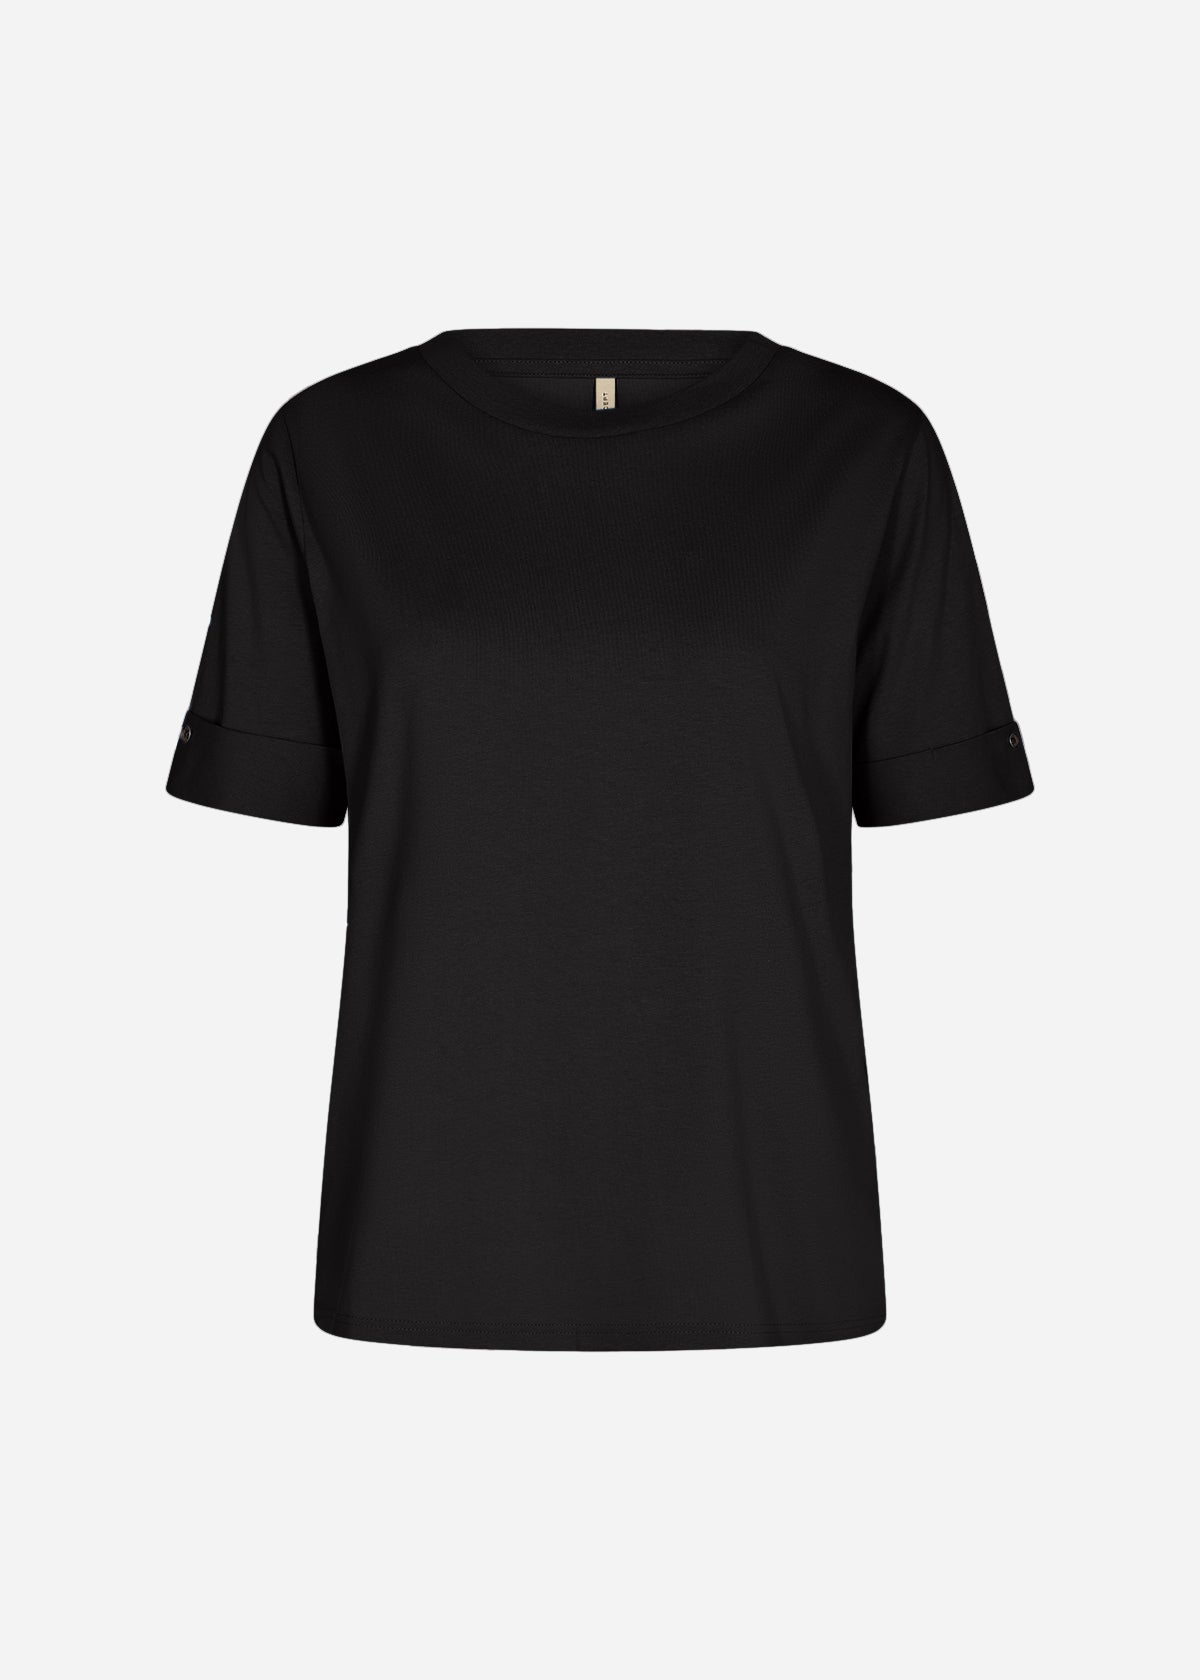 The Derby Tee in Black